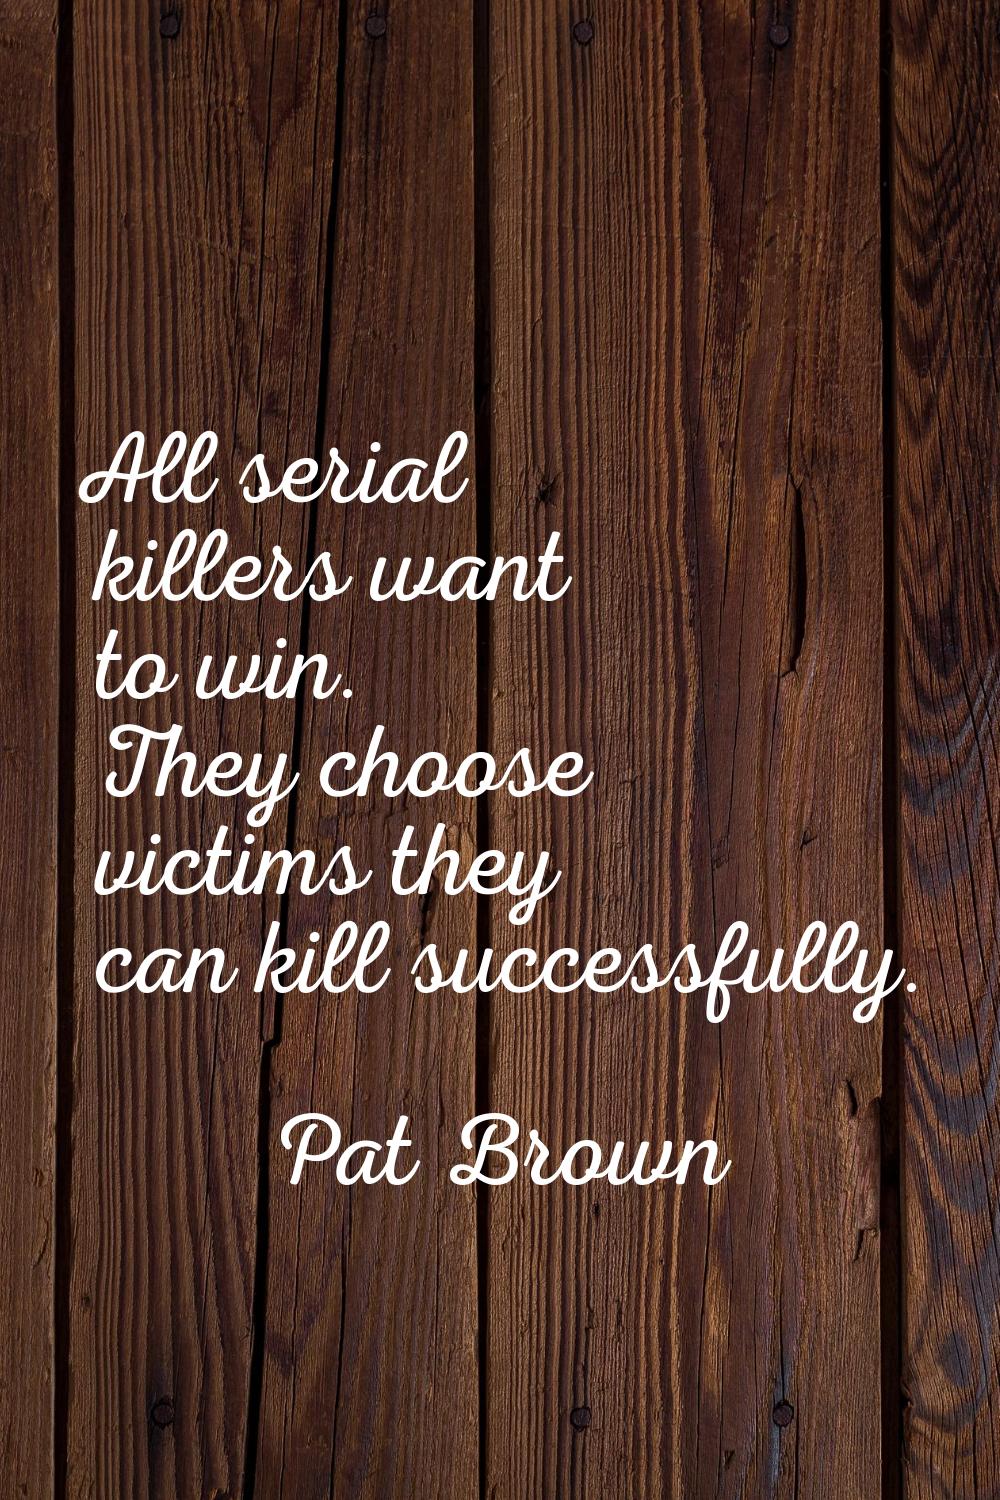 All serial killers want to win. They choose victims they can kill successfully.